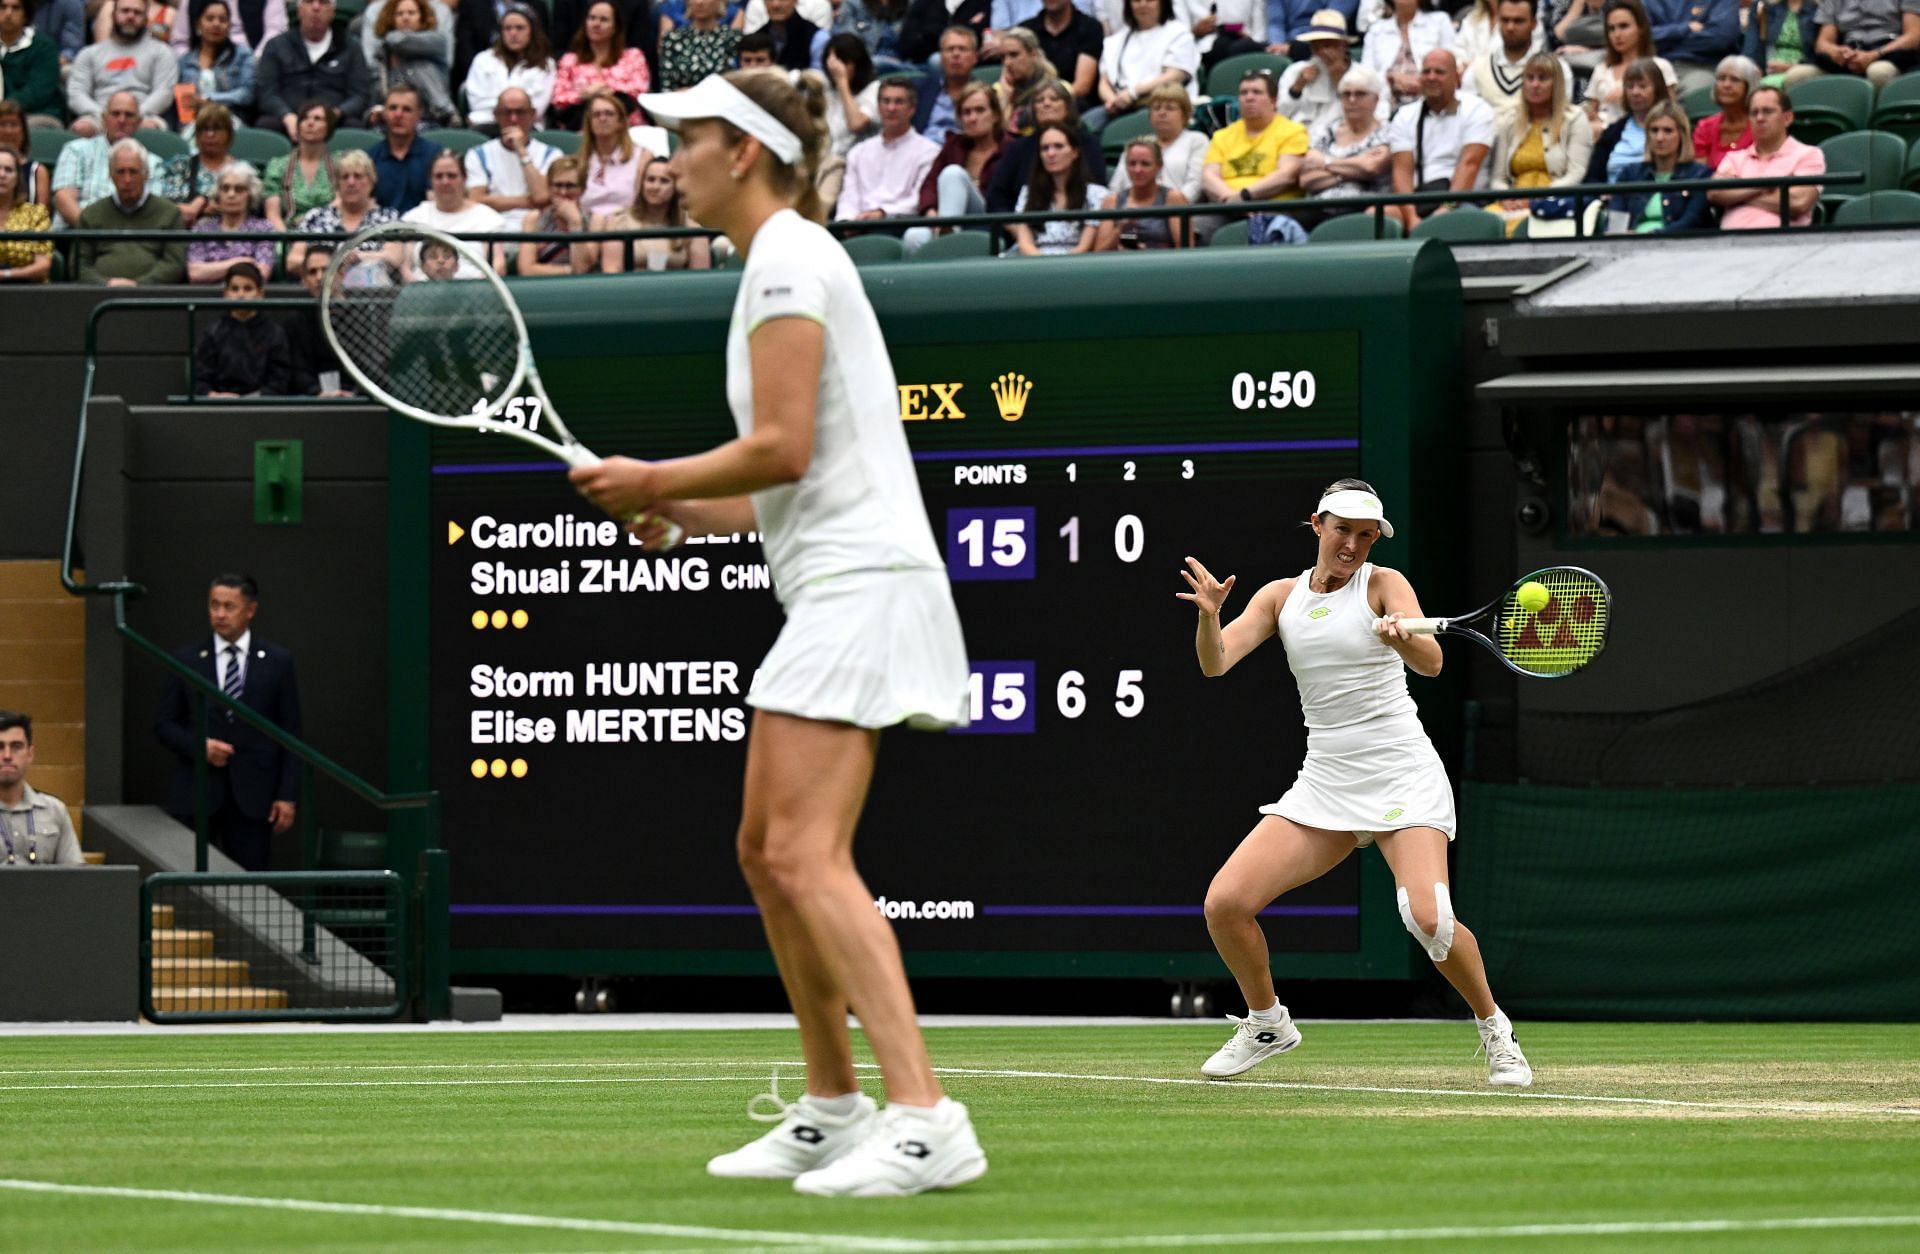 Storm Hunter and Elise Mertens at the 2023 Wimbledon Championships.